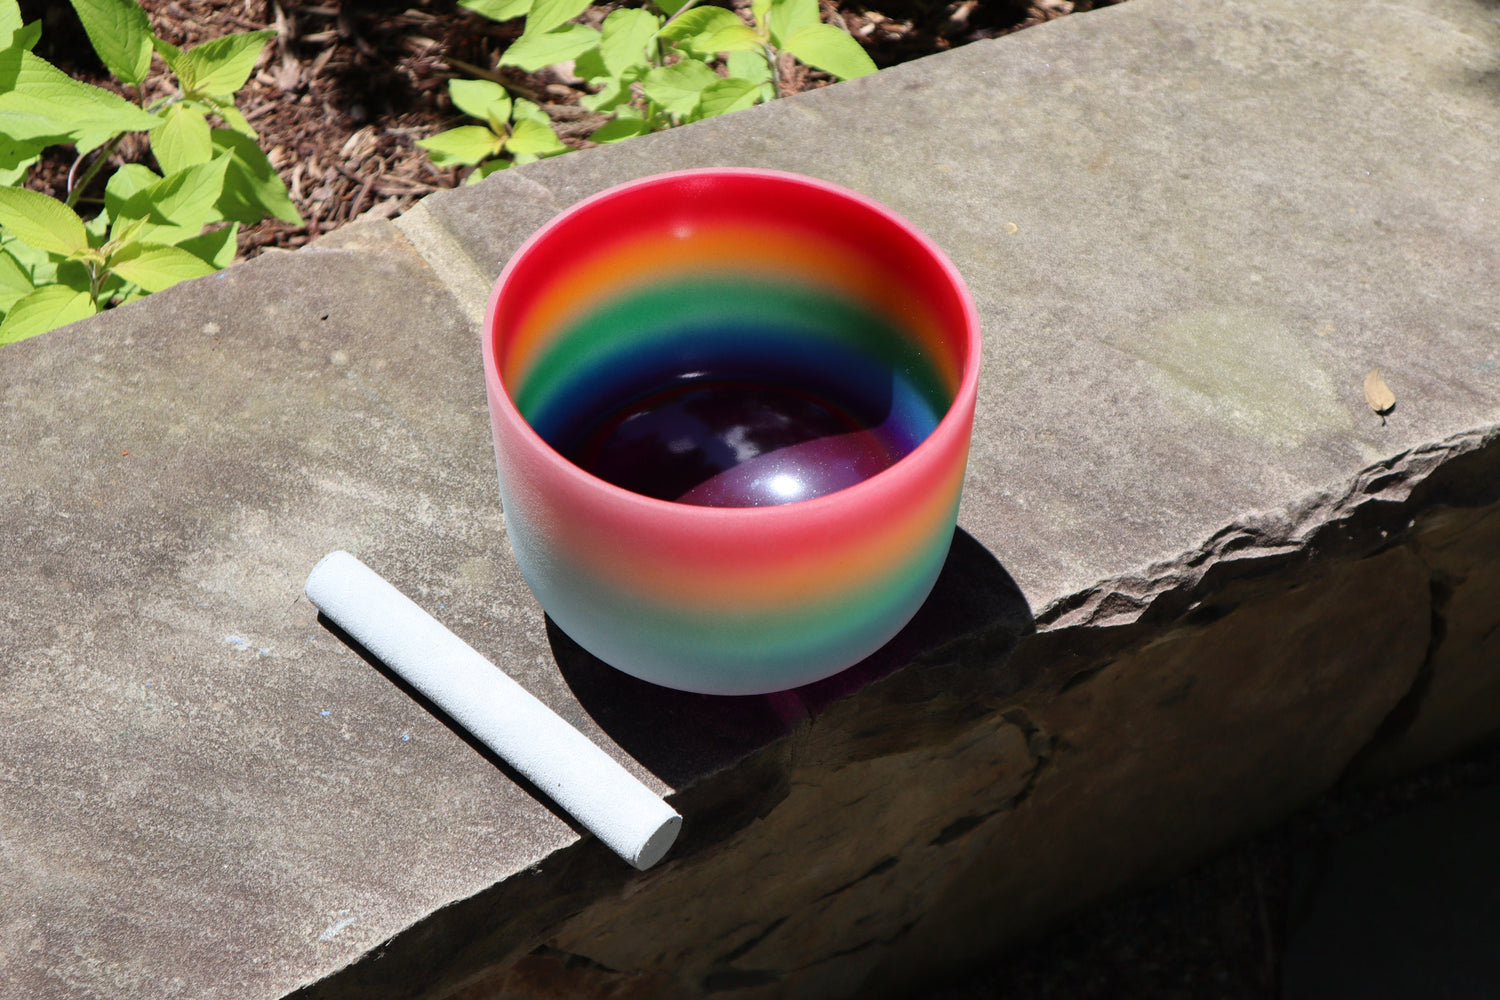 432hz Rainbow - 8” Crystal Singing Bowl And Padded Carry Case - 99% Quartz Crystal, O-Ring, Suede Striker, With Padded Carry Case